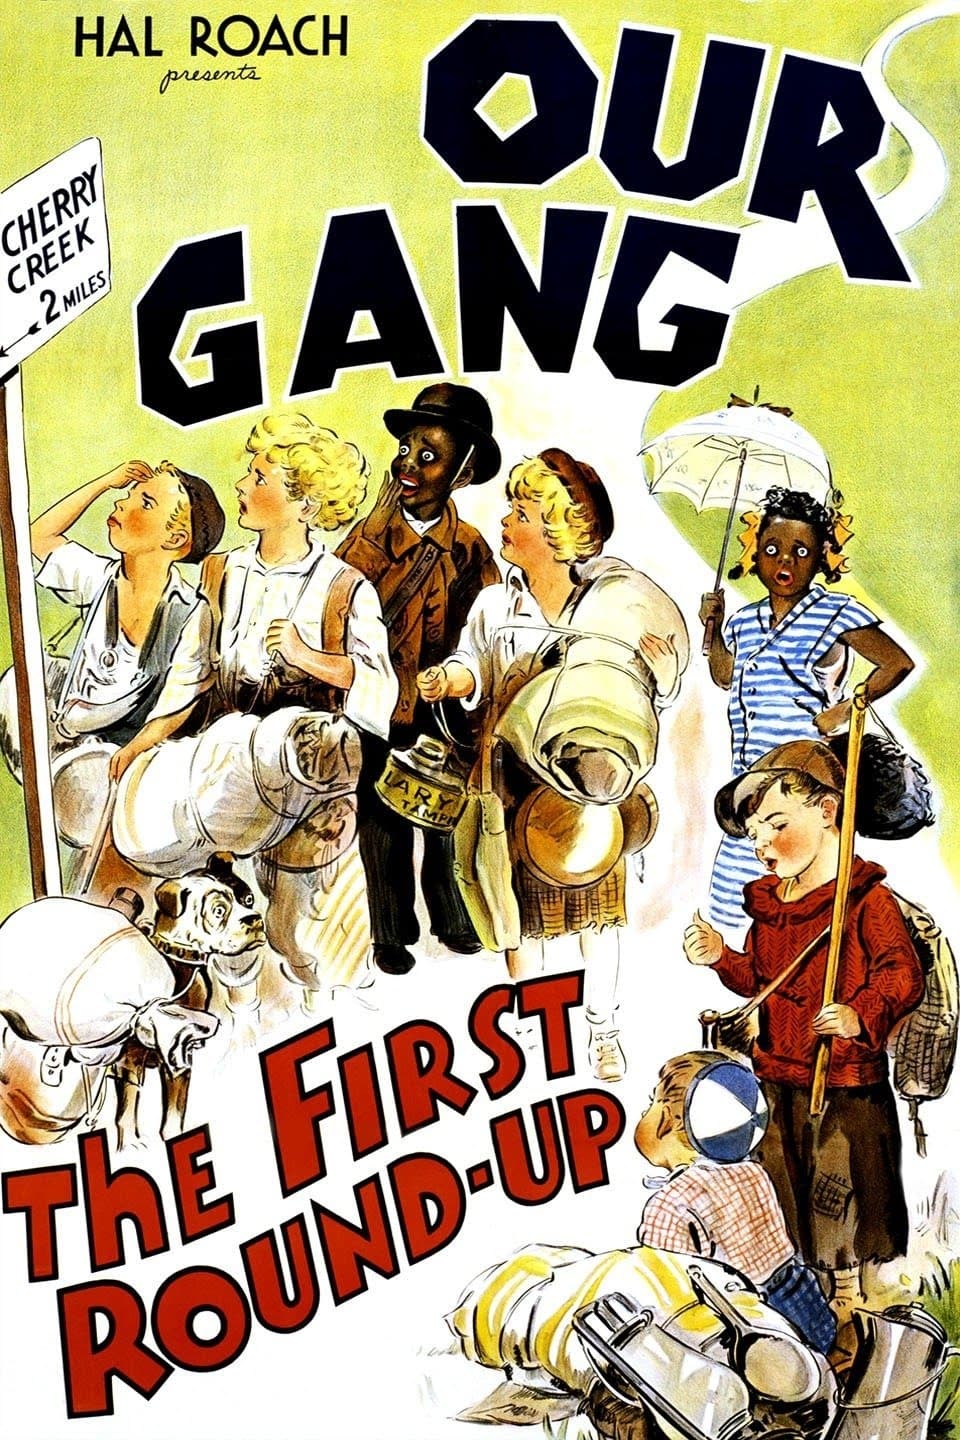 The First Round-Up (1934)